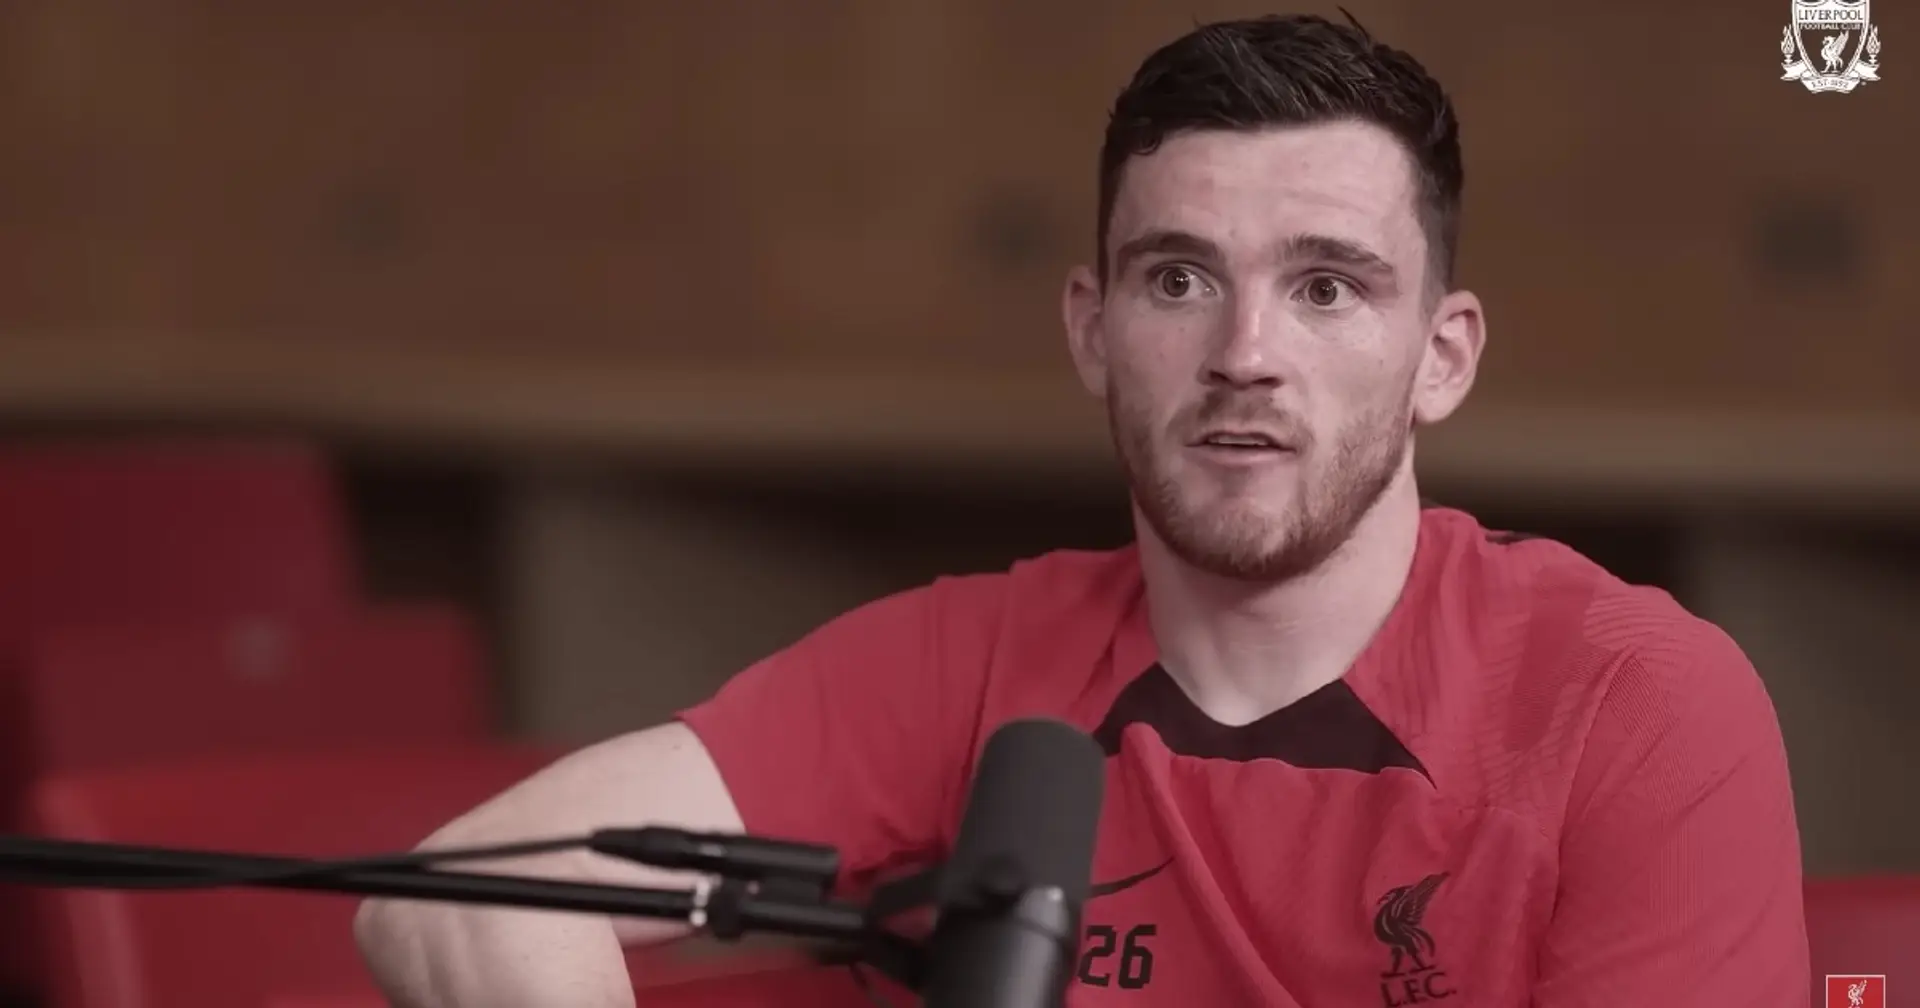 'He's had a tough time with injuries': Robertson names on Liverpool player who is finally 'getting the appreciation he deserves'